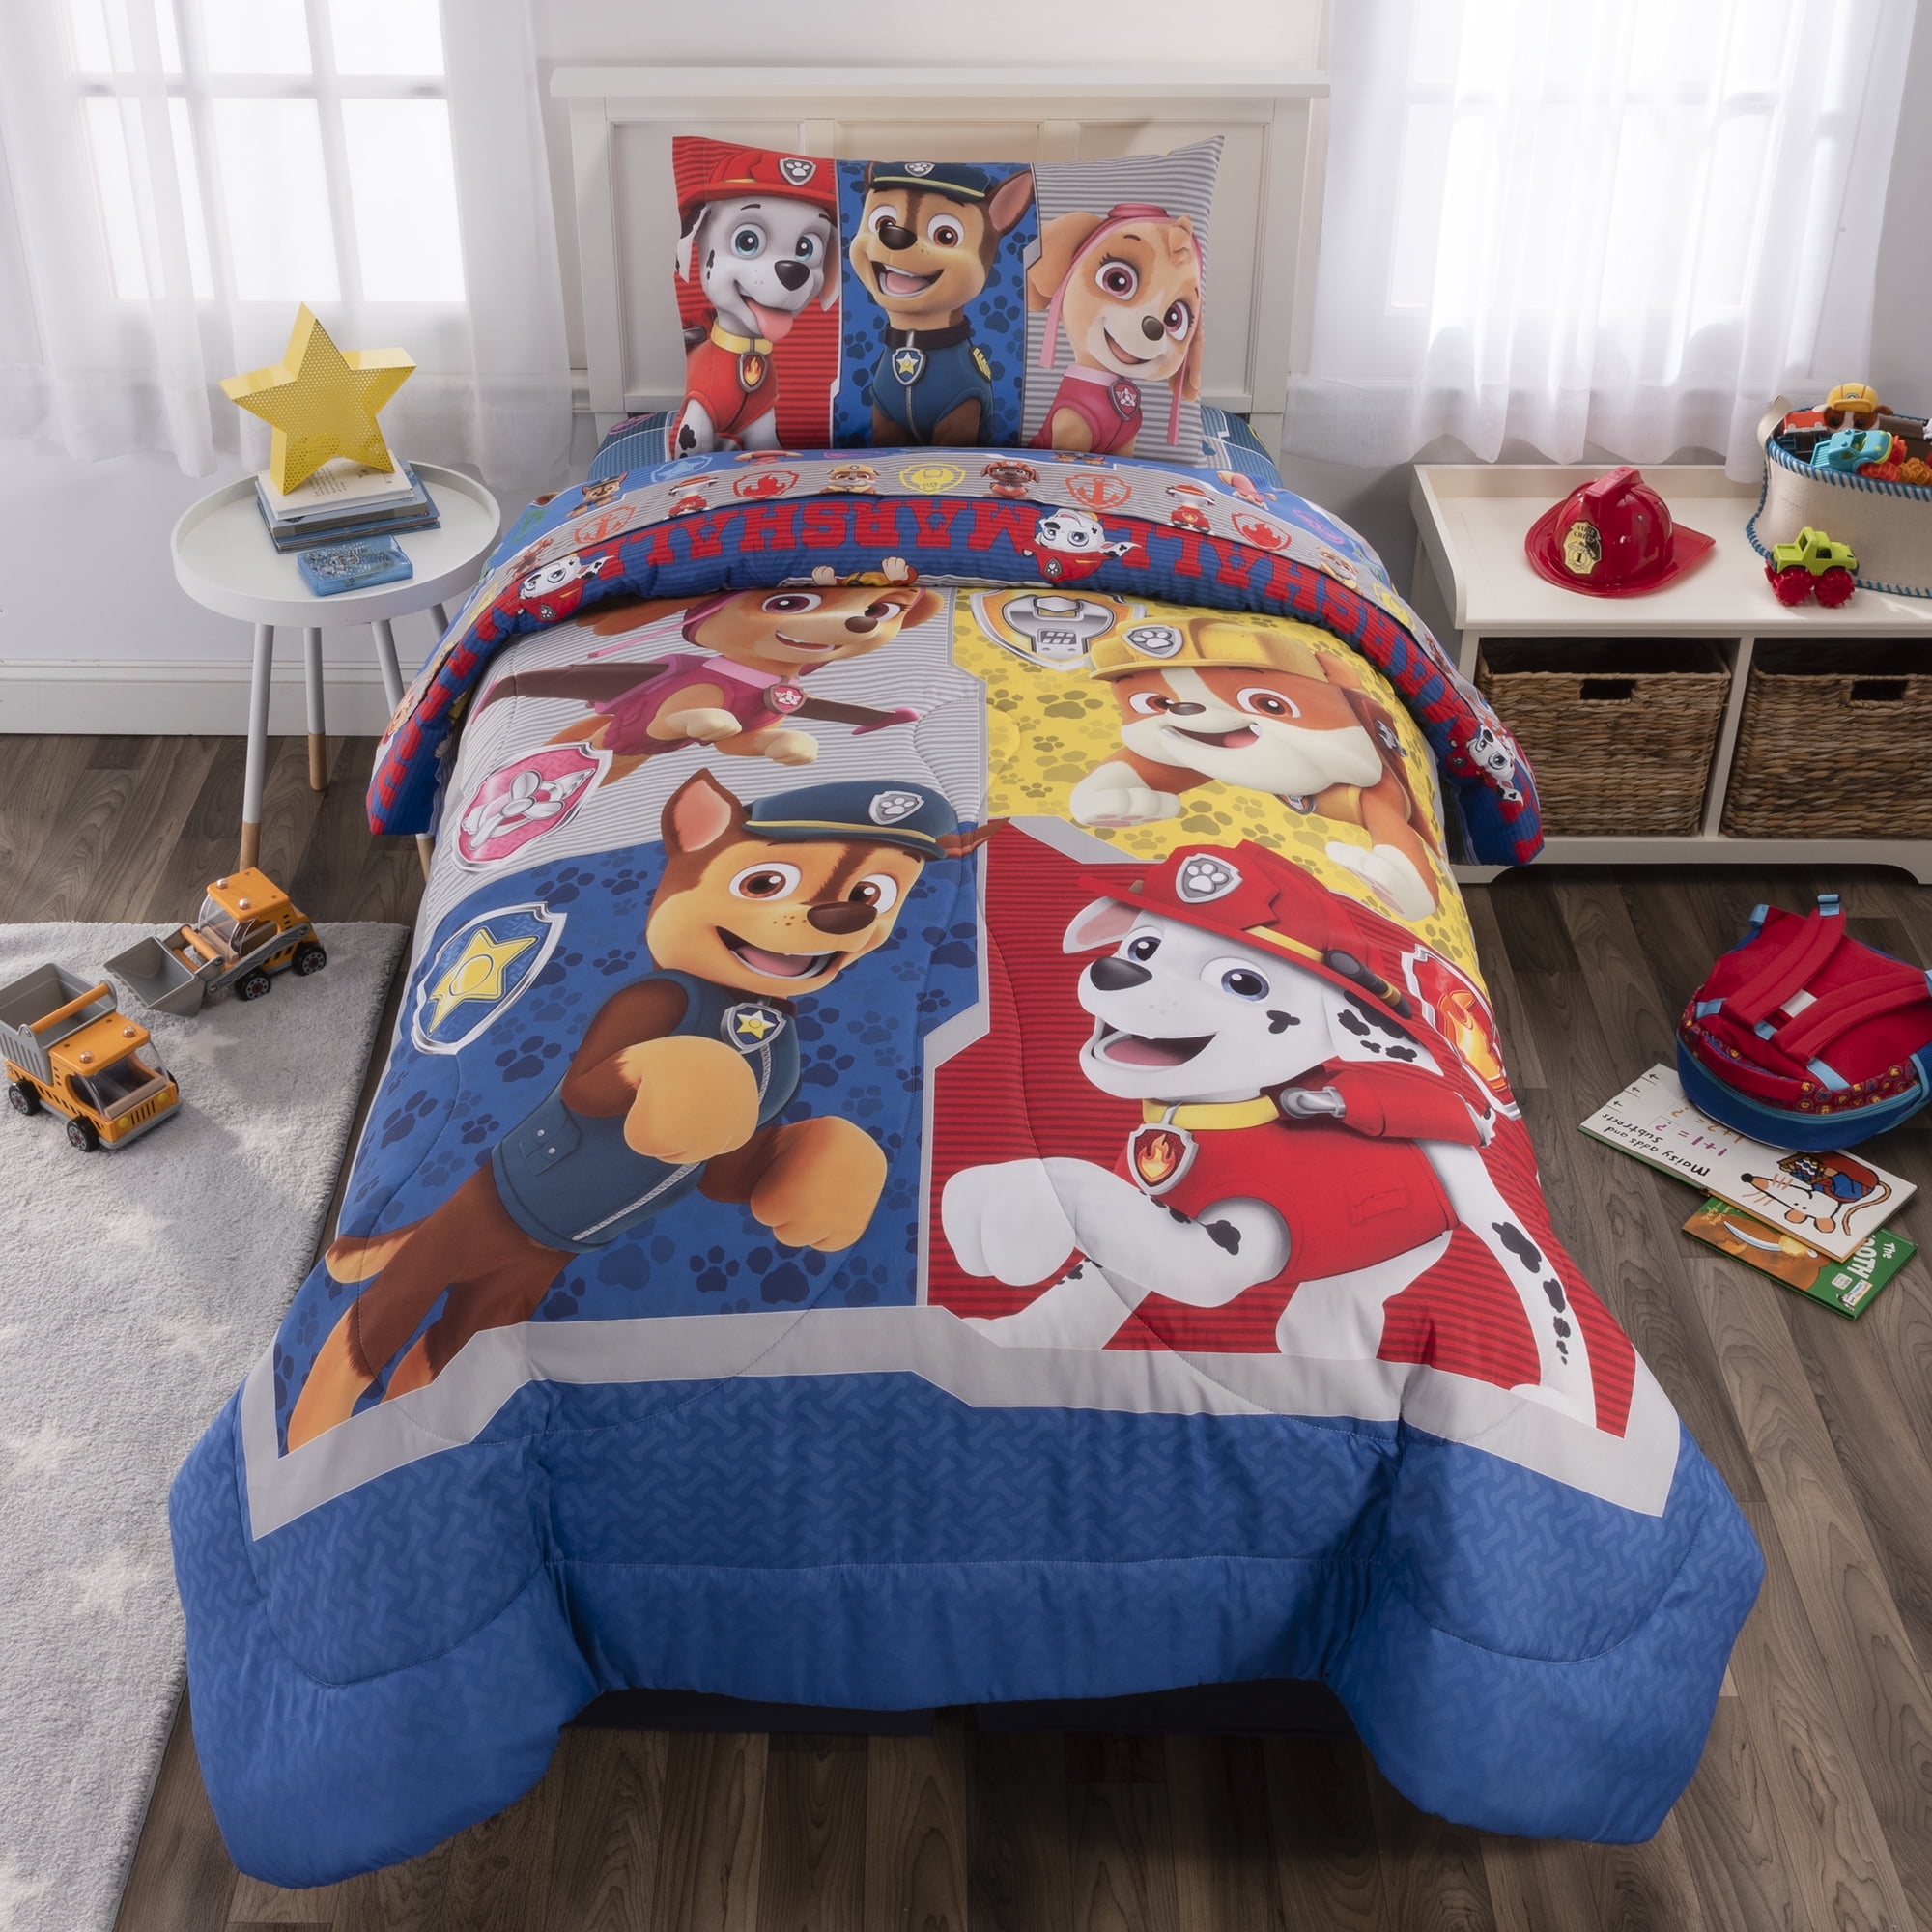 Toddler Twin Size Bed Sheets Boys Paw Patrol Rescue with Pillowcase Bedding Set 